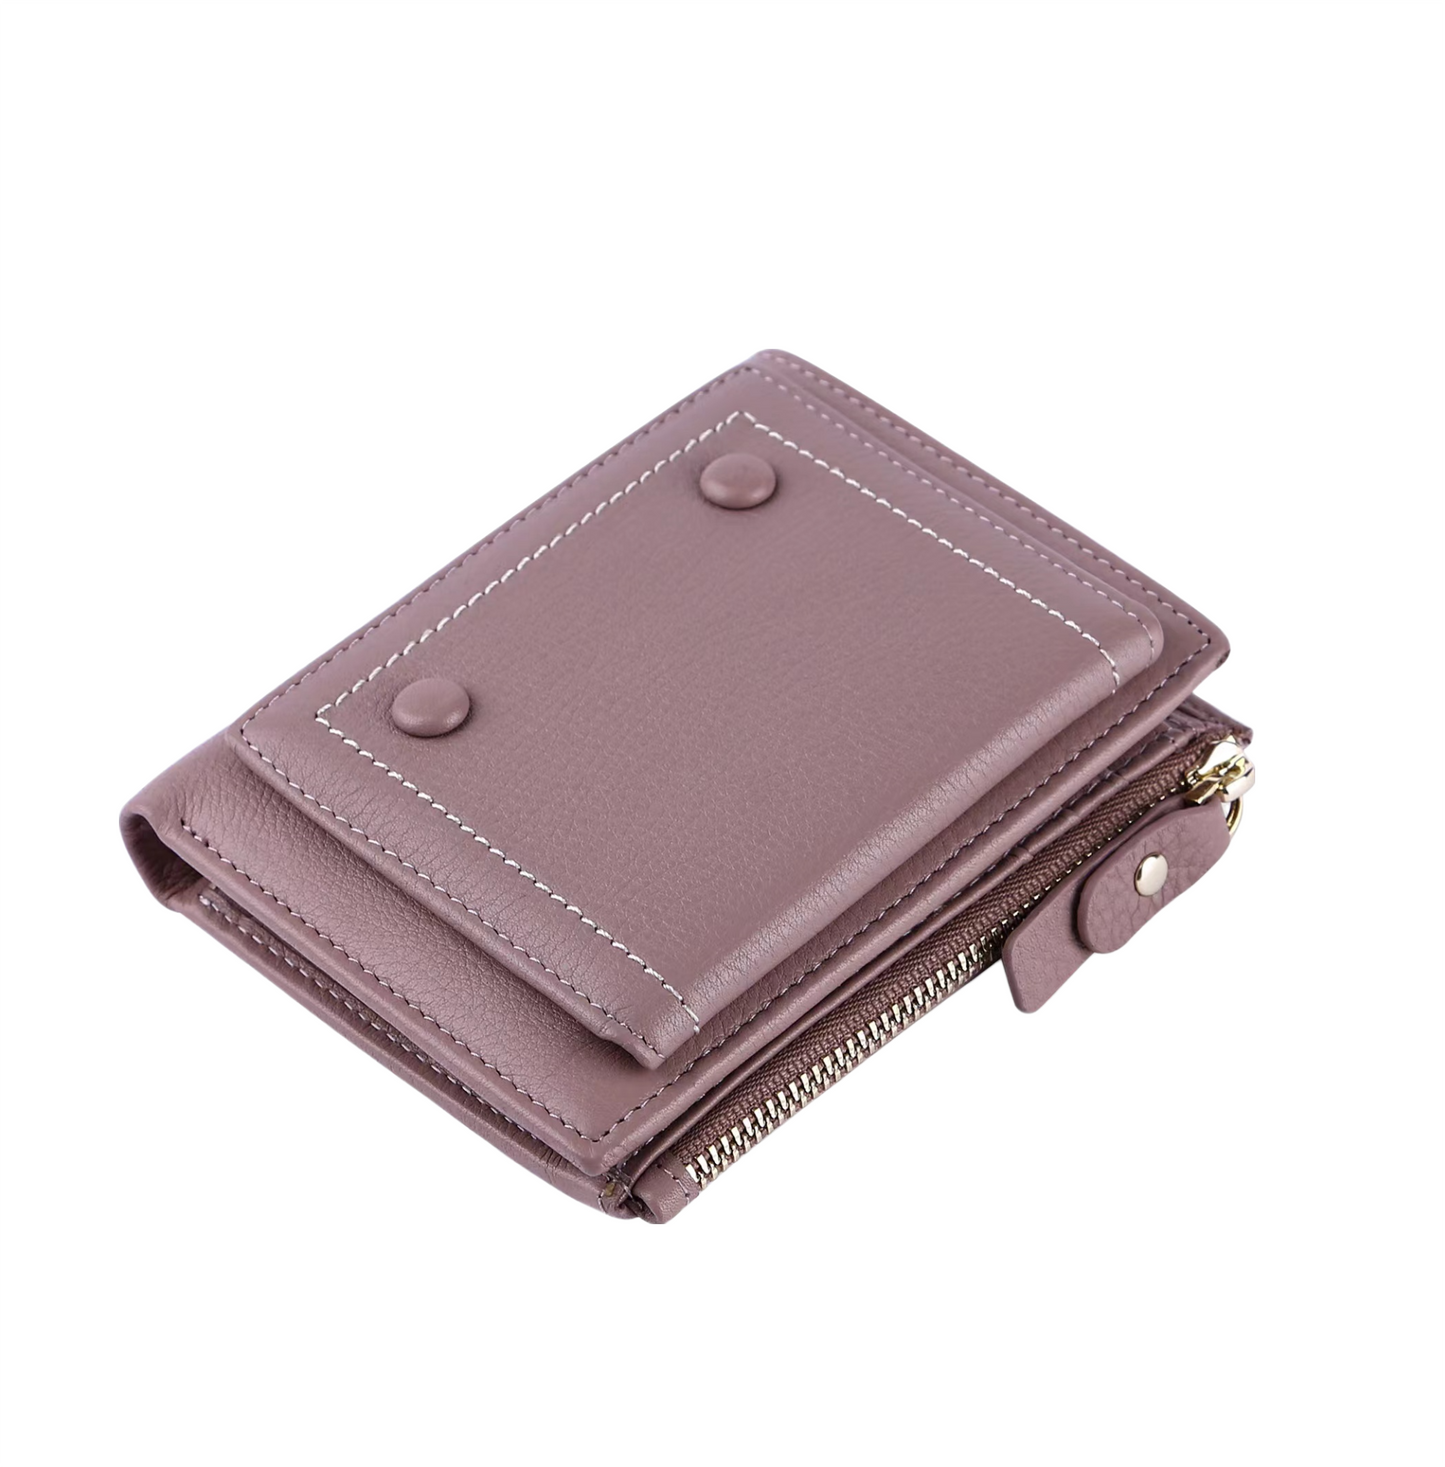 Women's genuine cowhide leather short wallet coin pouch / card holder Flap design with zip